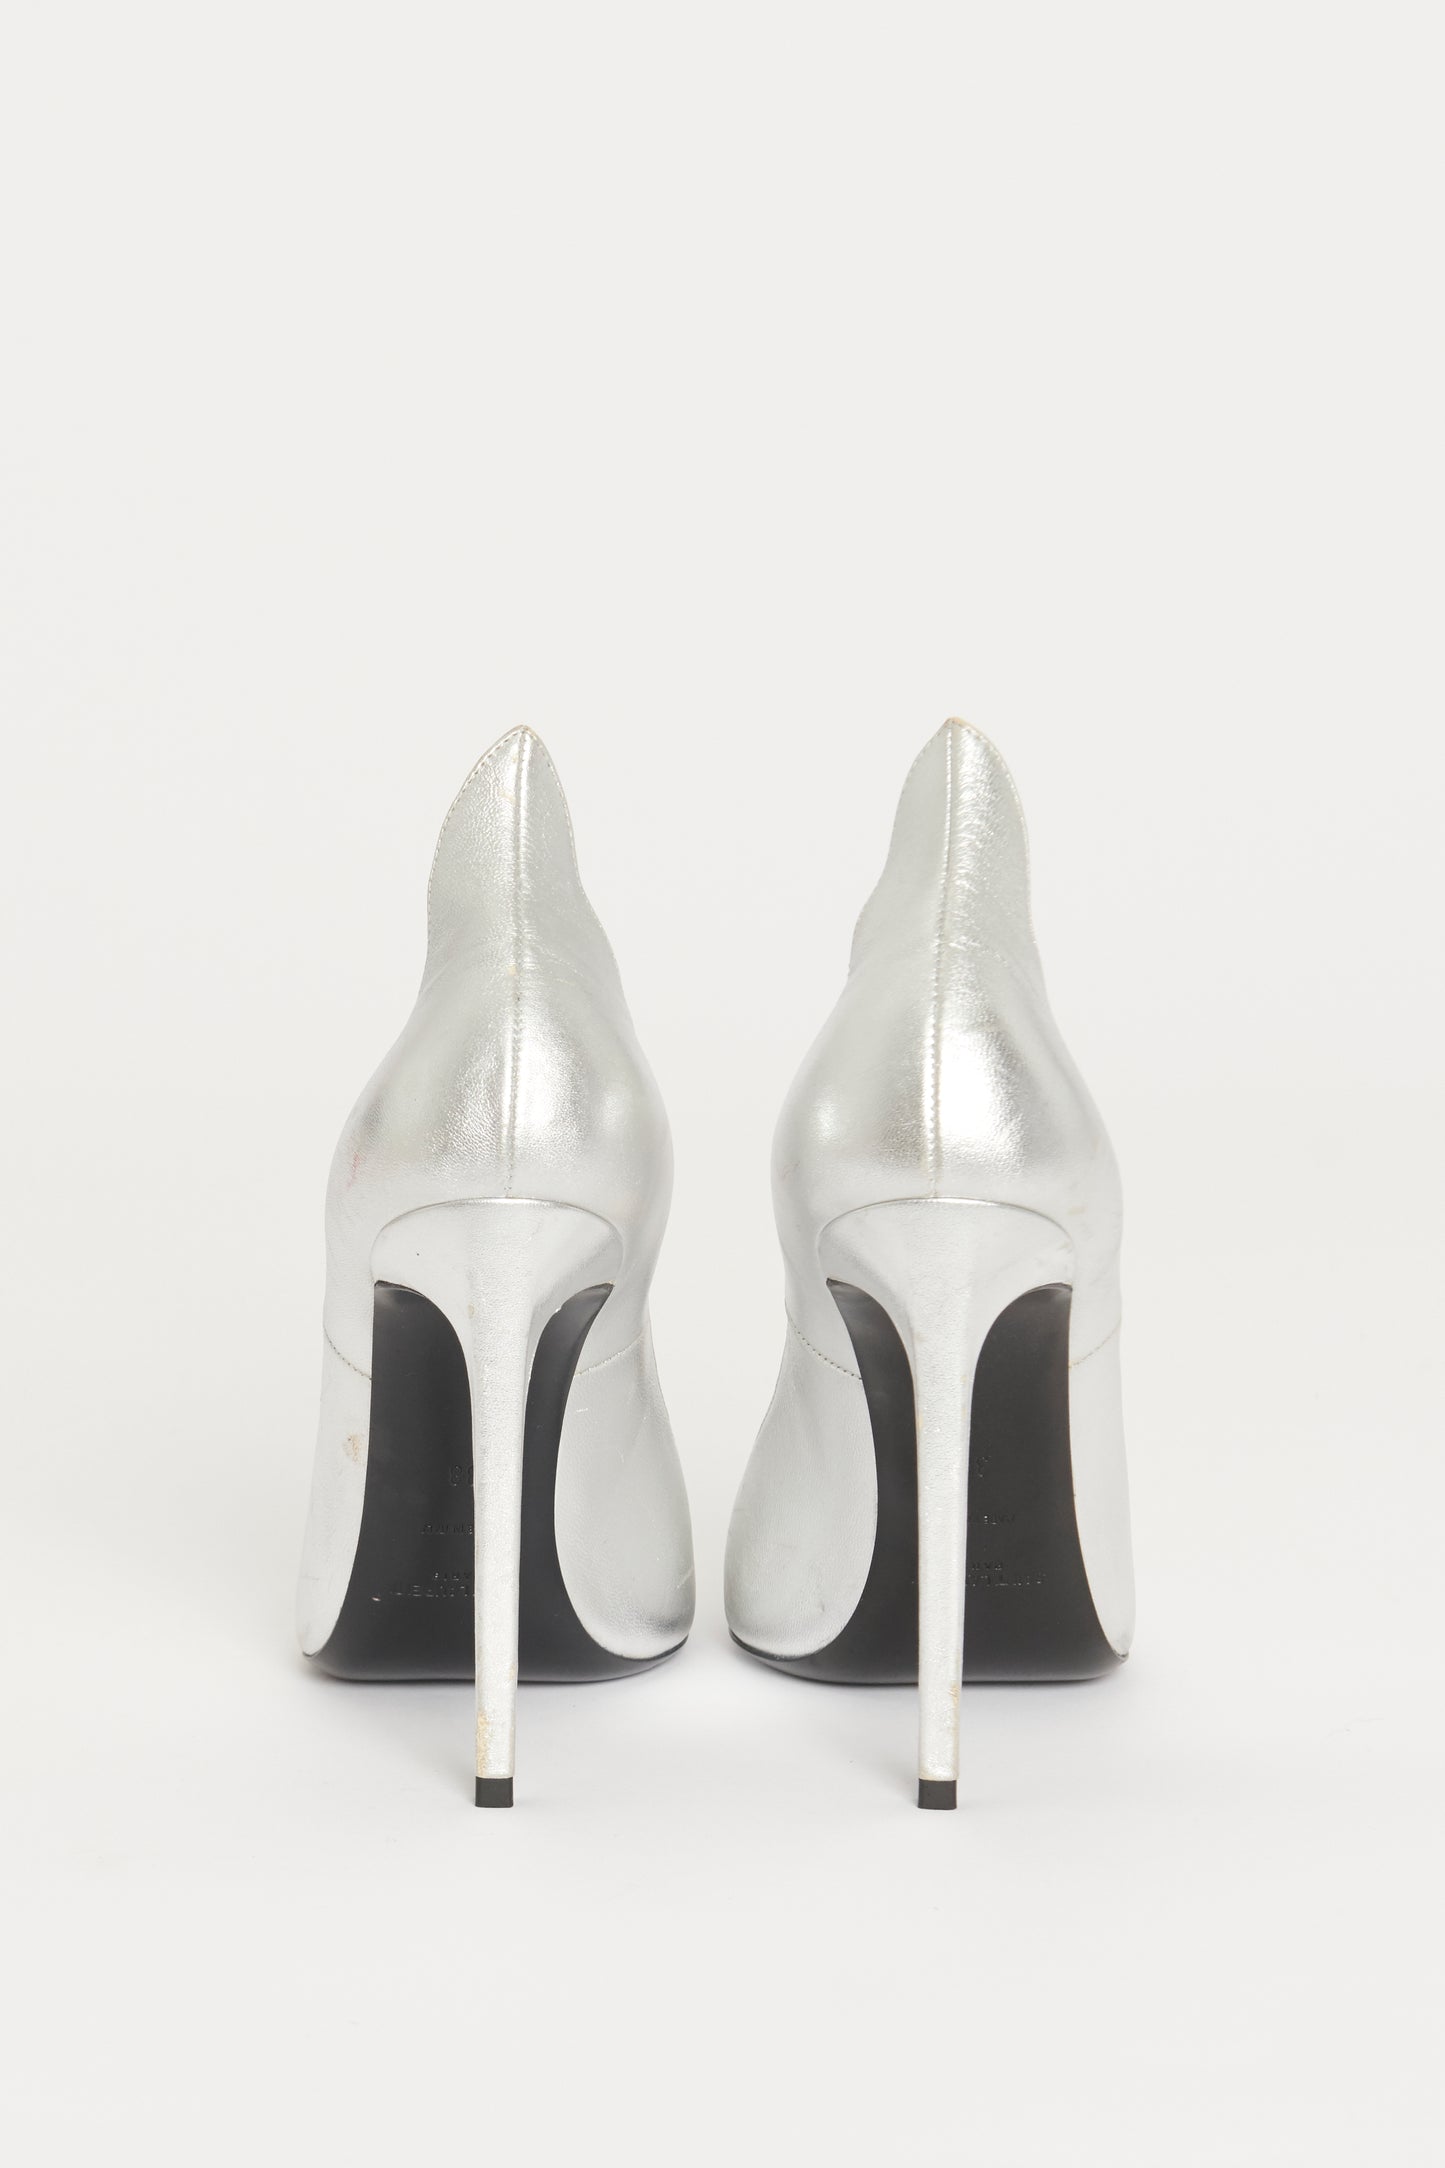 Silver Leather Preowned Stiletto Pumps